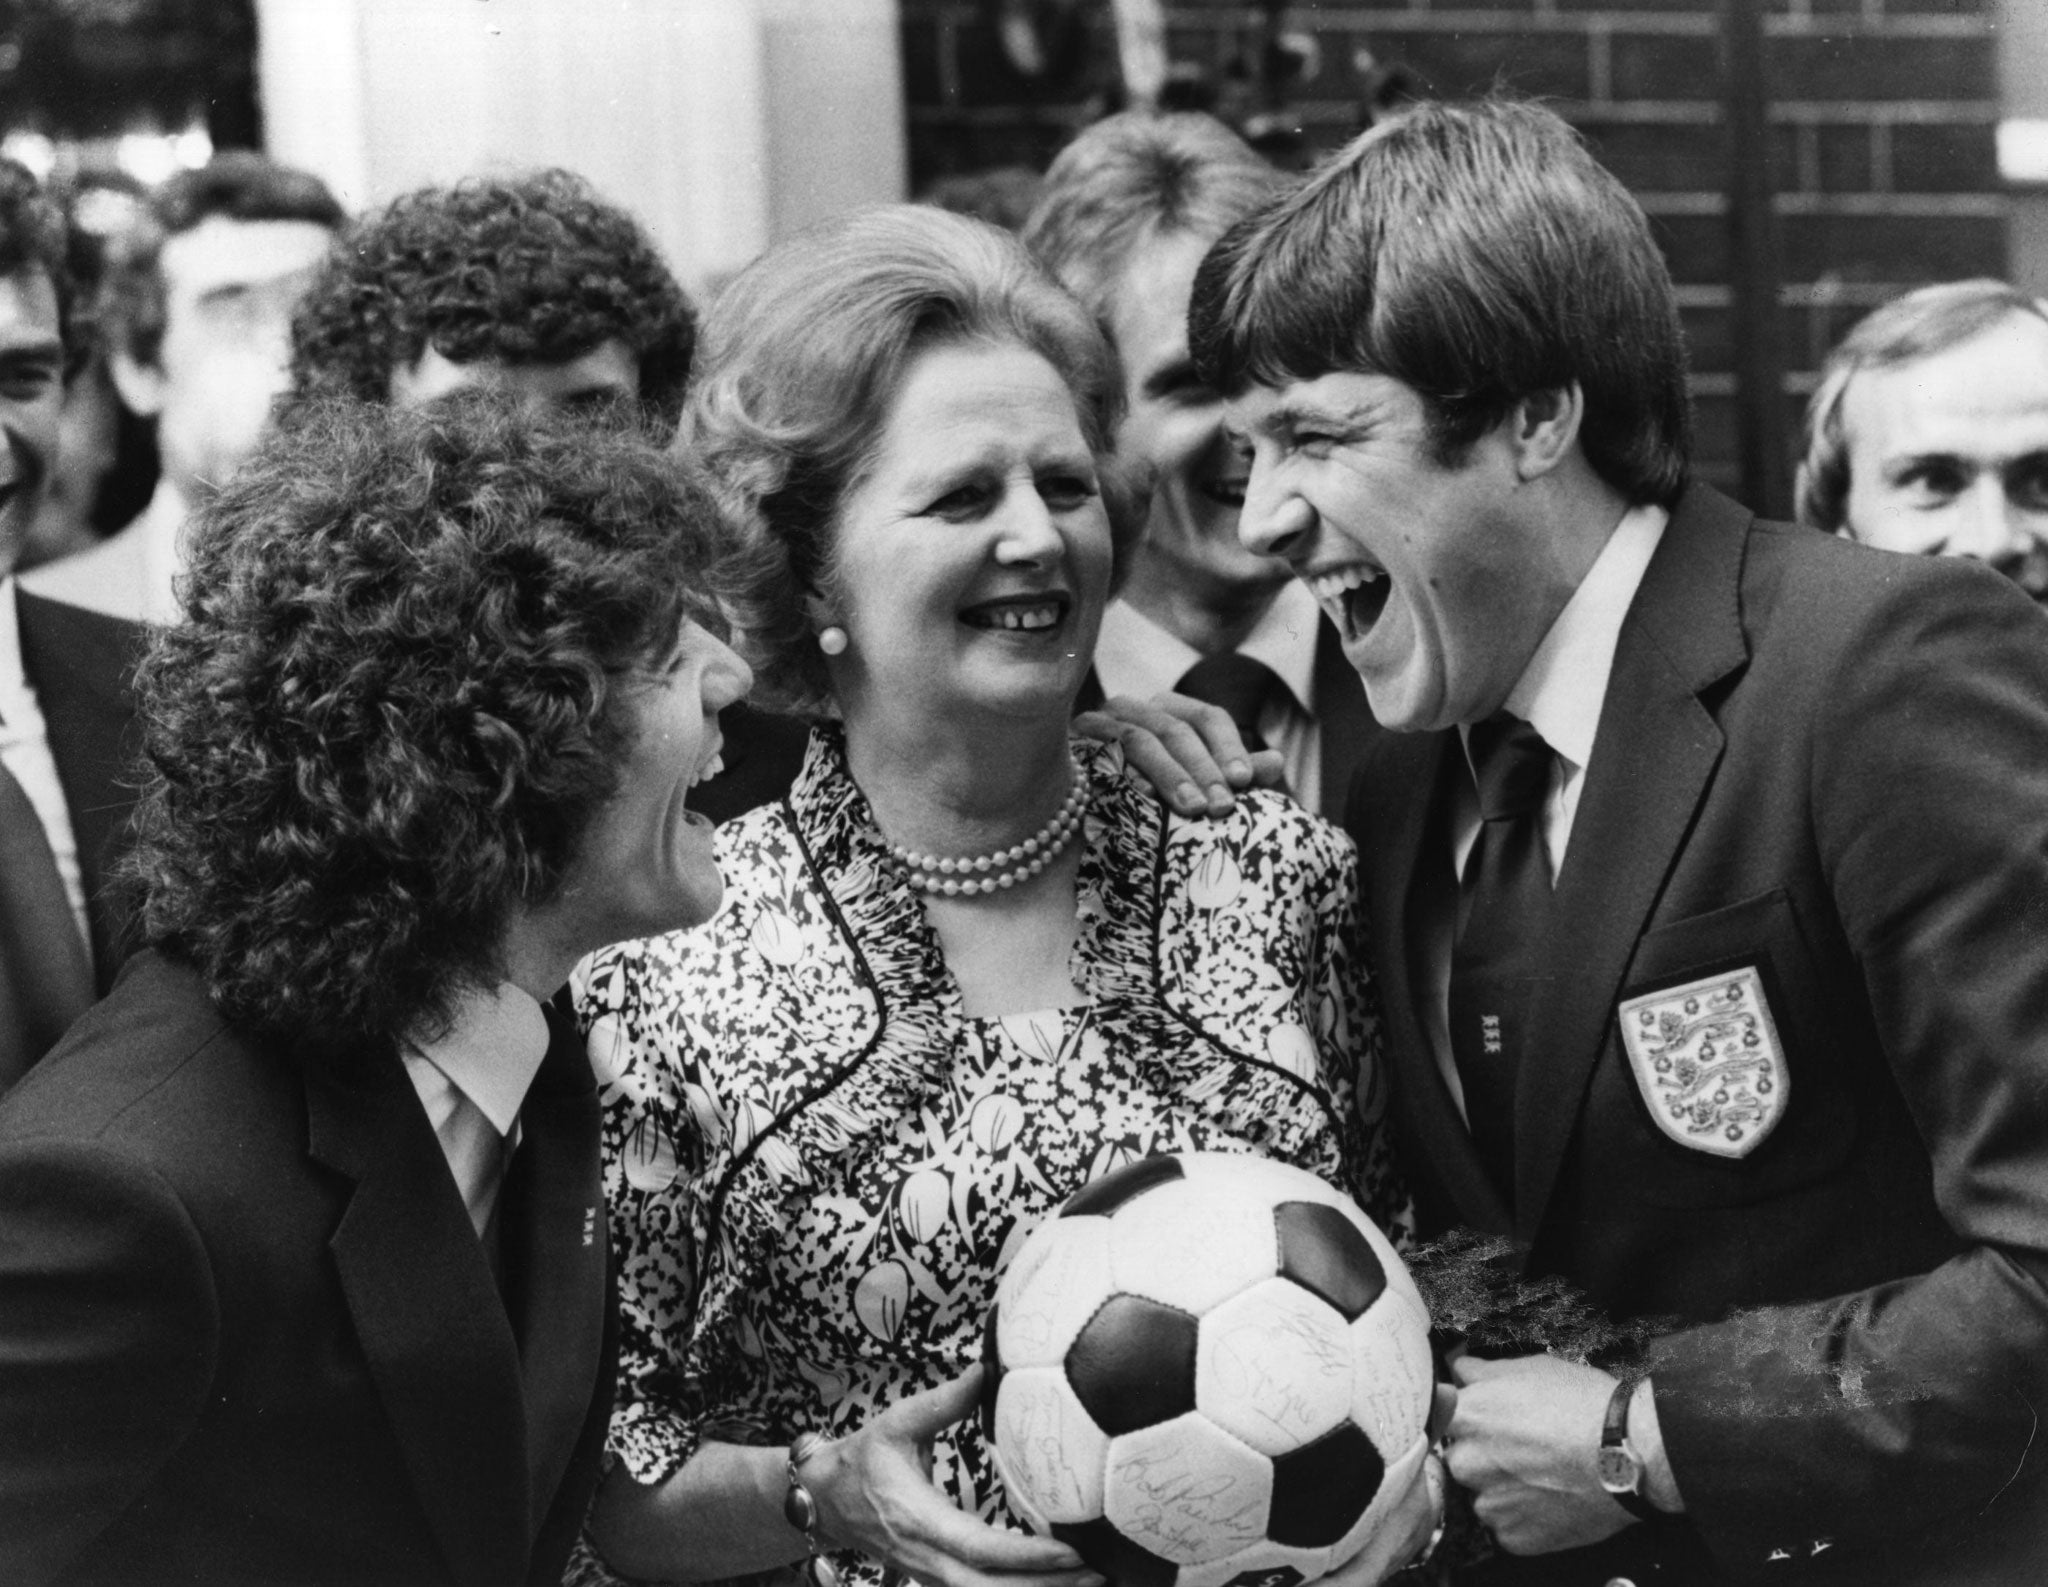 A staged photograph with Kevin Keegan and Emlyn Hughes outside Downing Street in 1980 belied Thatcher's poor relationship with football and its fans